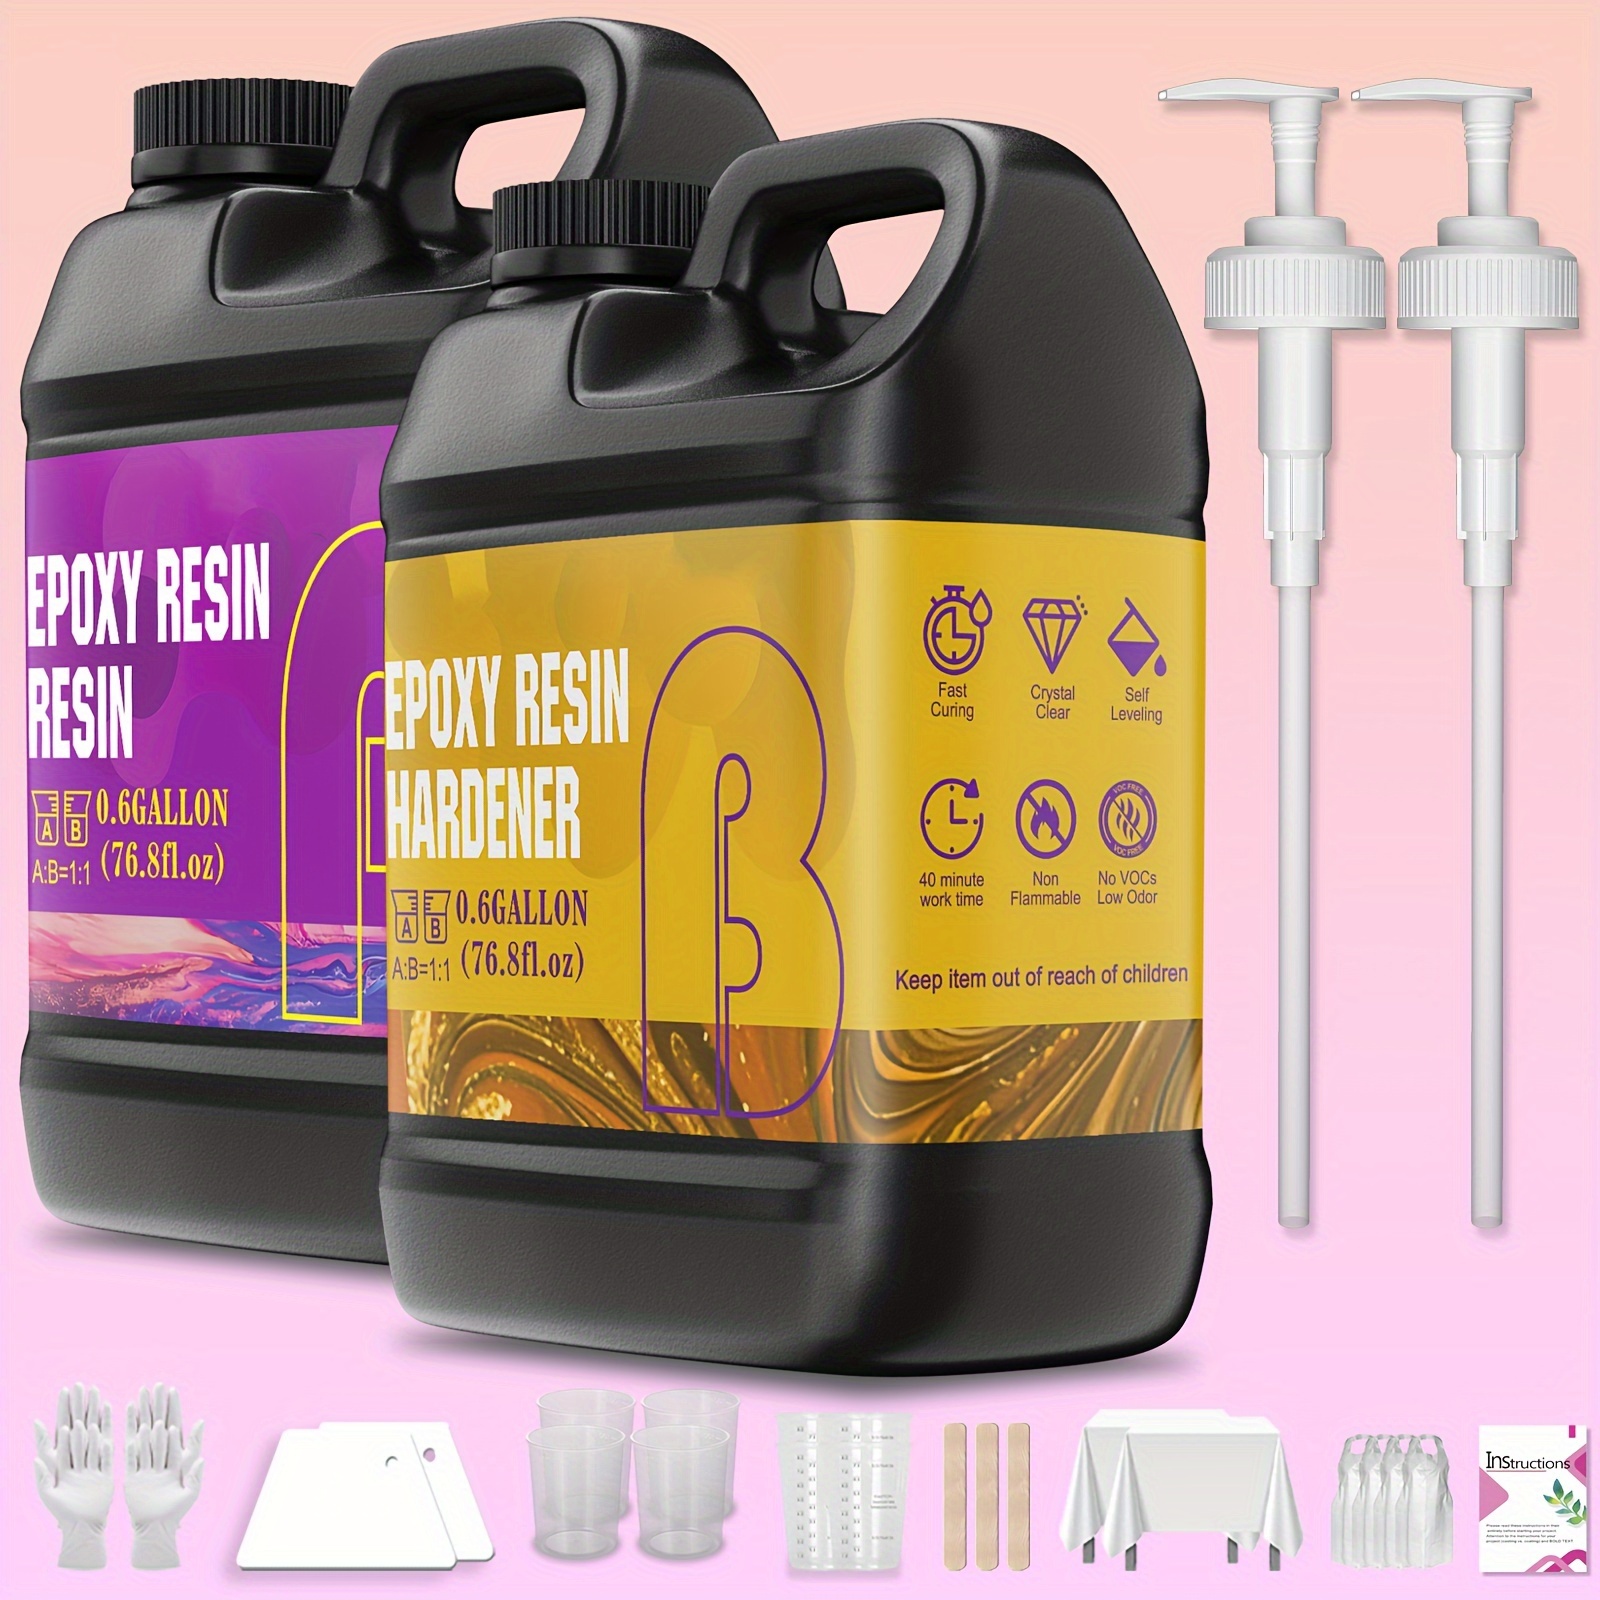 

Epoxy Resin Kit 1.2 Gallon, Crystal Clear Epoxy Resin, Bubble-free, Anti-yellowing Art Resin, Suitable For Casting, Diy, Resin Art, Resin Epoxy Molds, Jewelry, Easy To Use